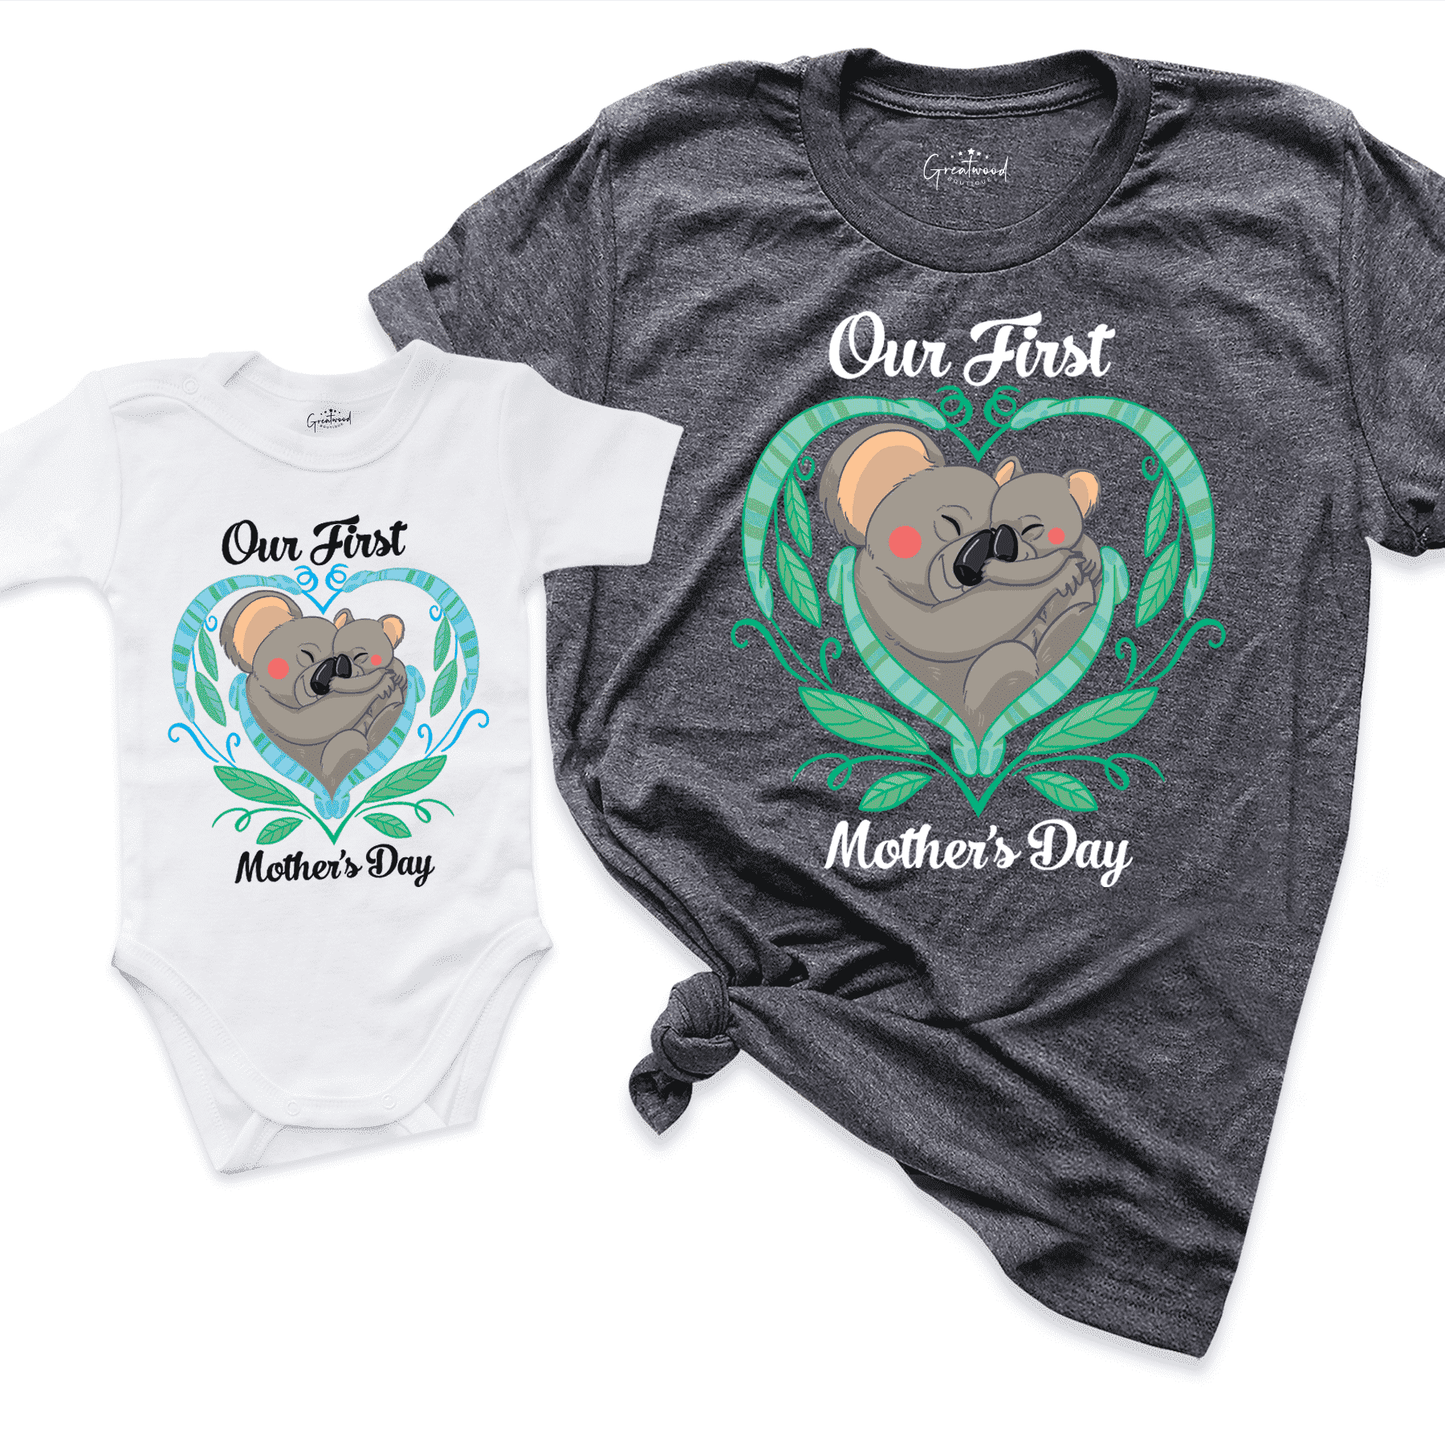 Our First Mothers Day Shirt D.Grey - Greatwood Boutique